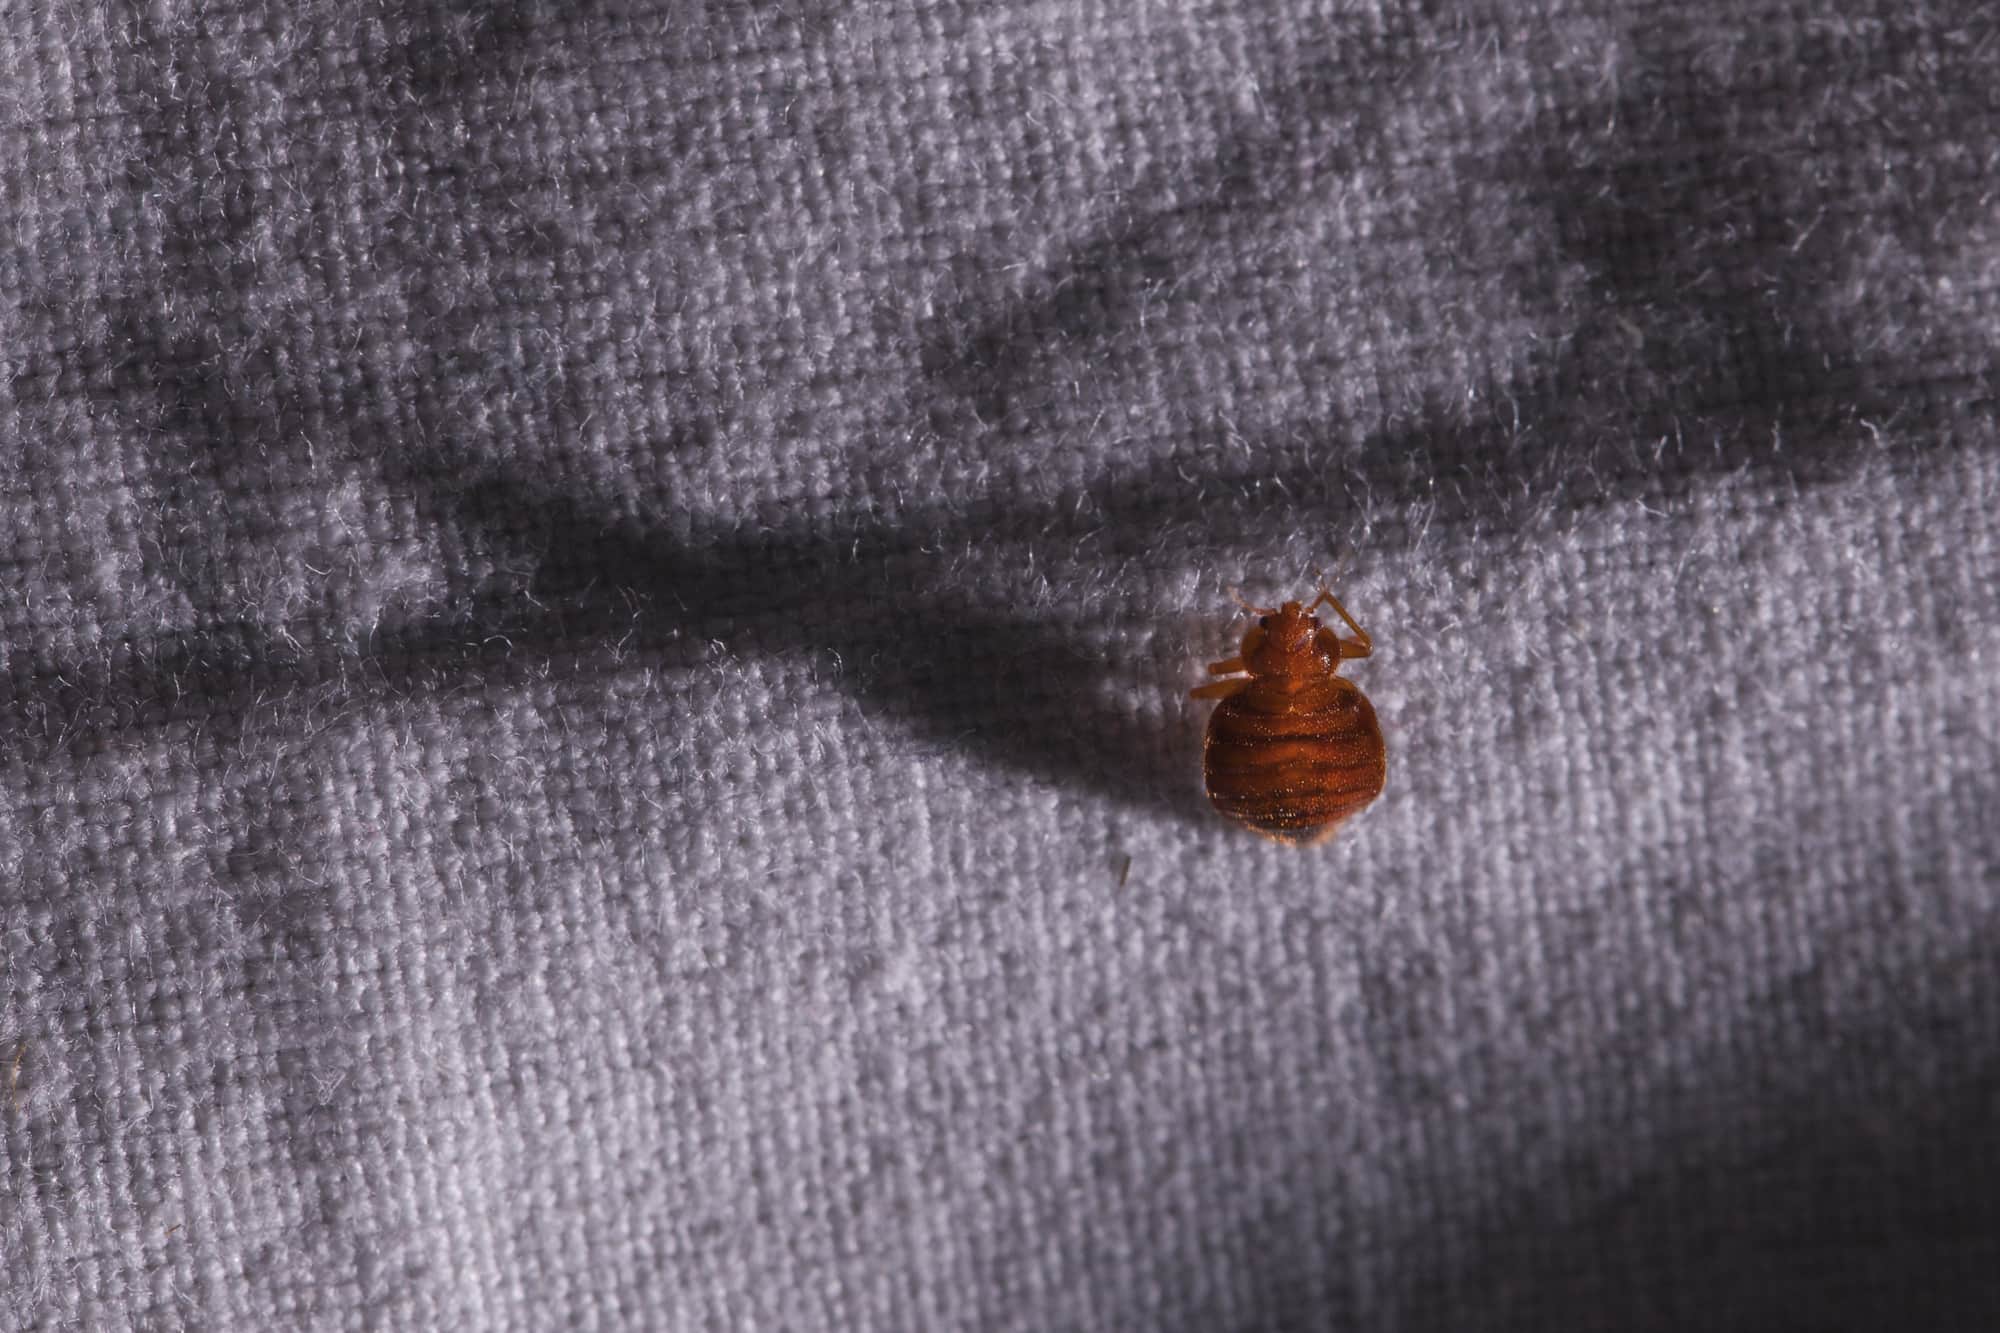 Announcing the 2017 Pest of the Year Bed Bugs